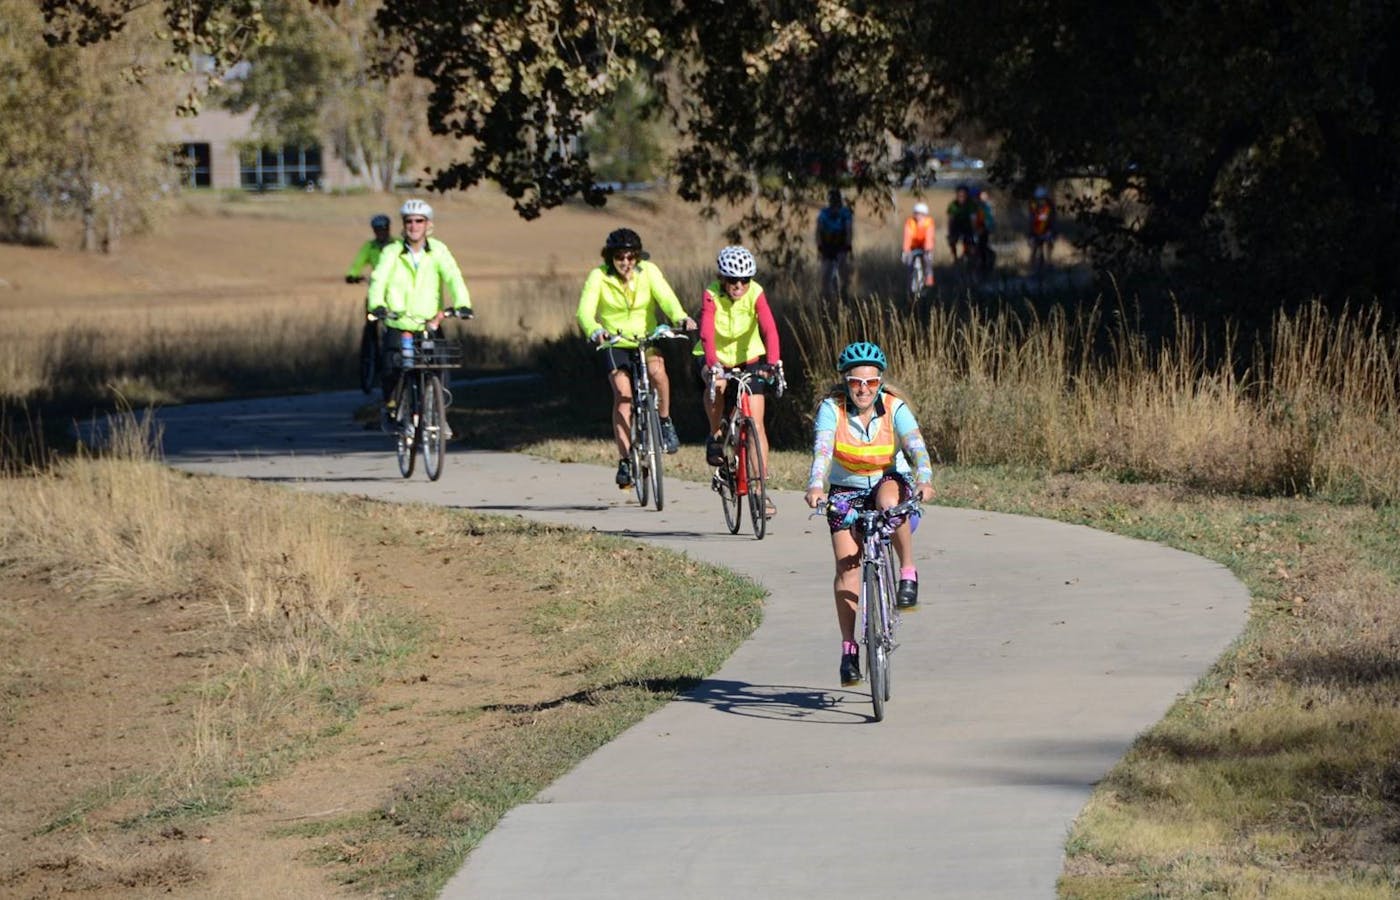 Imagery for the Longmont’s Multifaceted Approach to Better Bicycling story